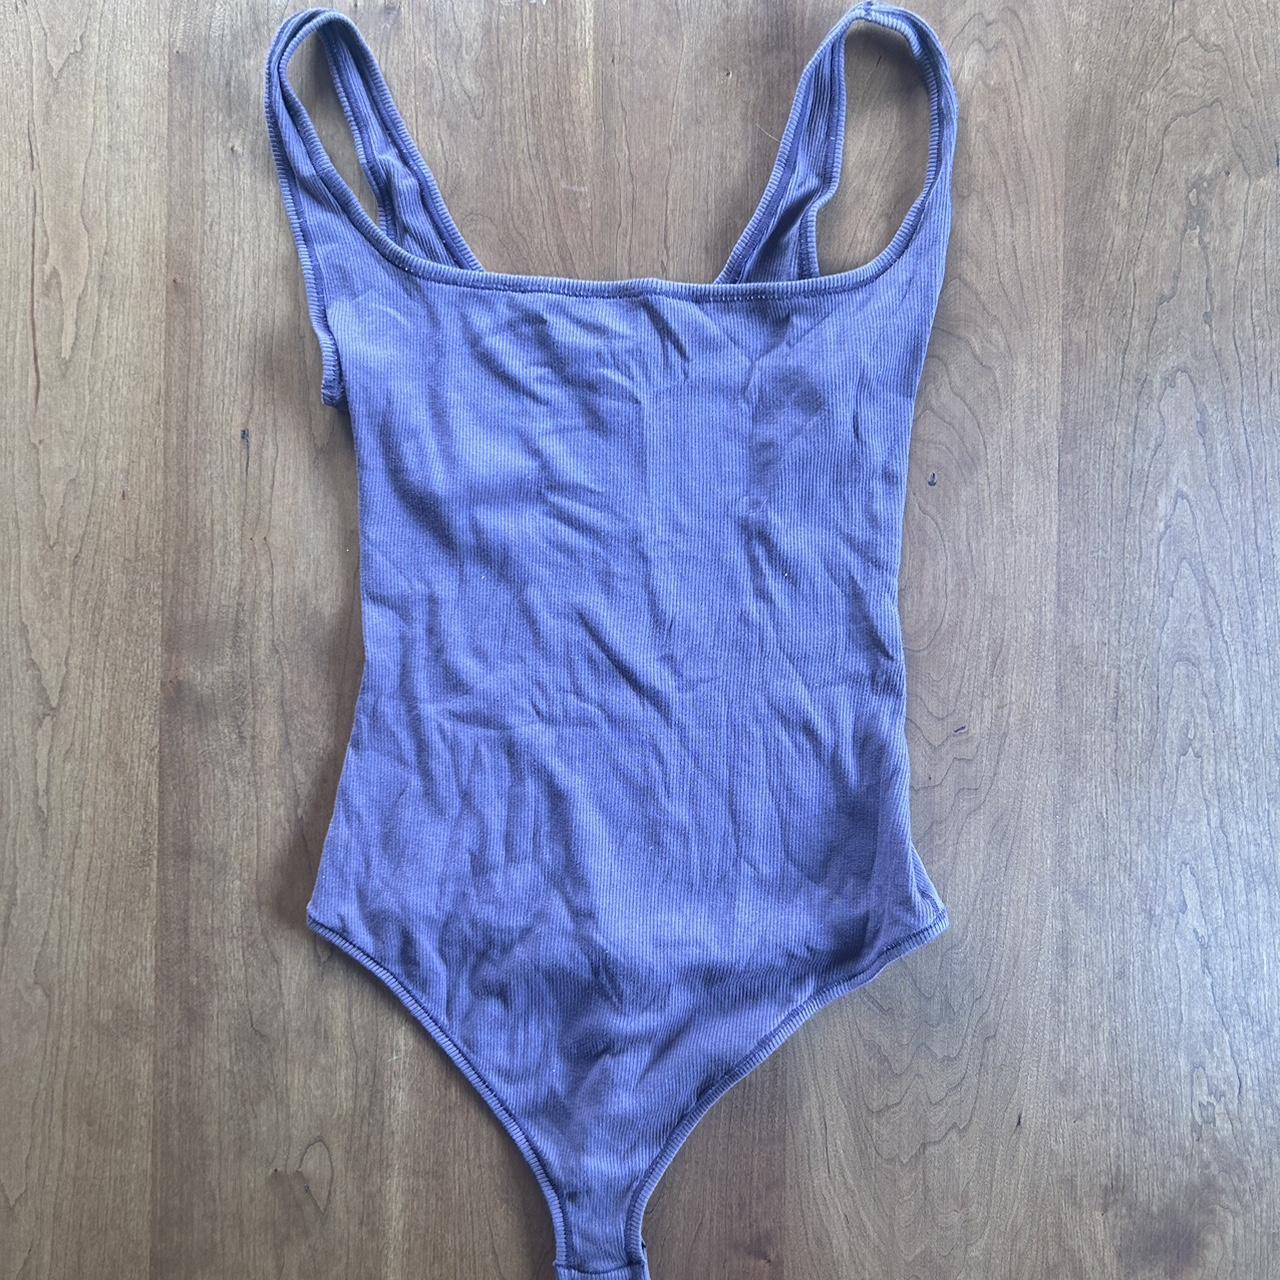 Adorable skims cotton ribbed bodysuit, size M and... - Depop